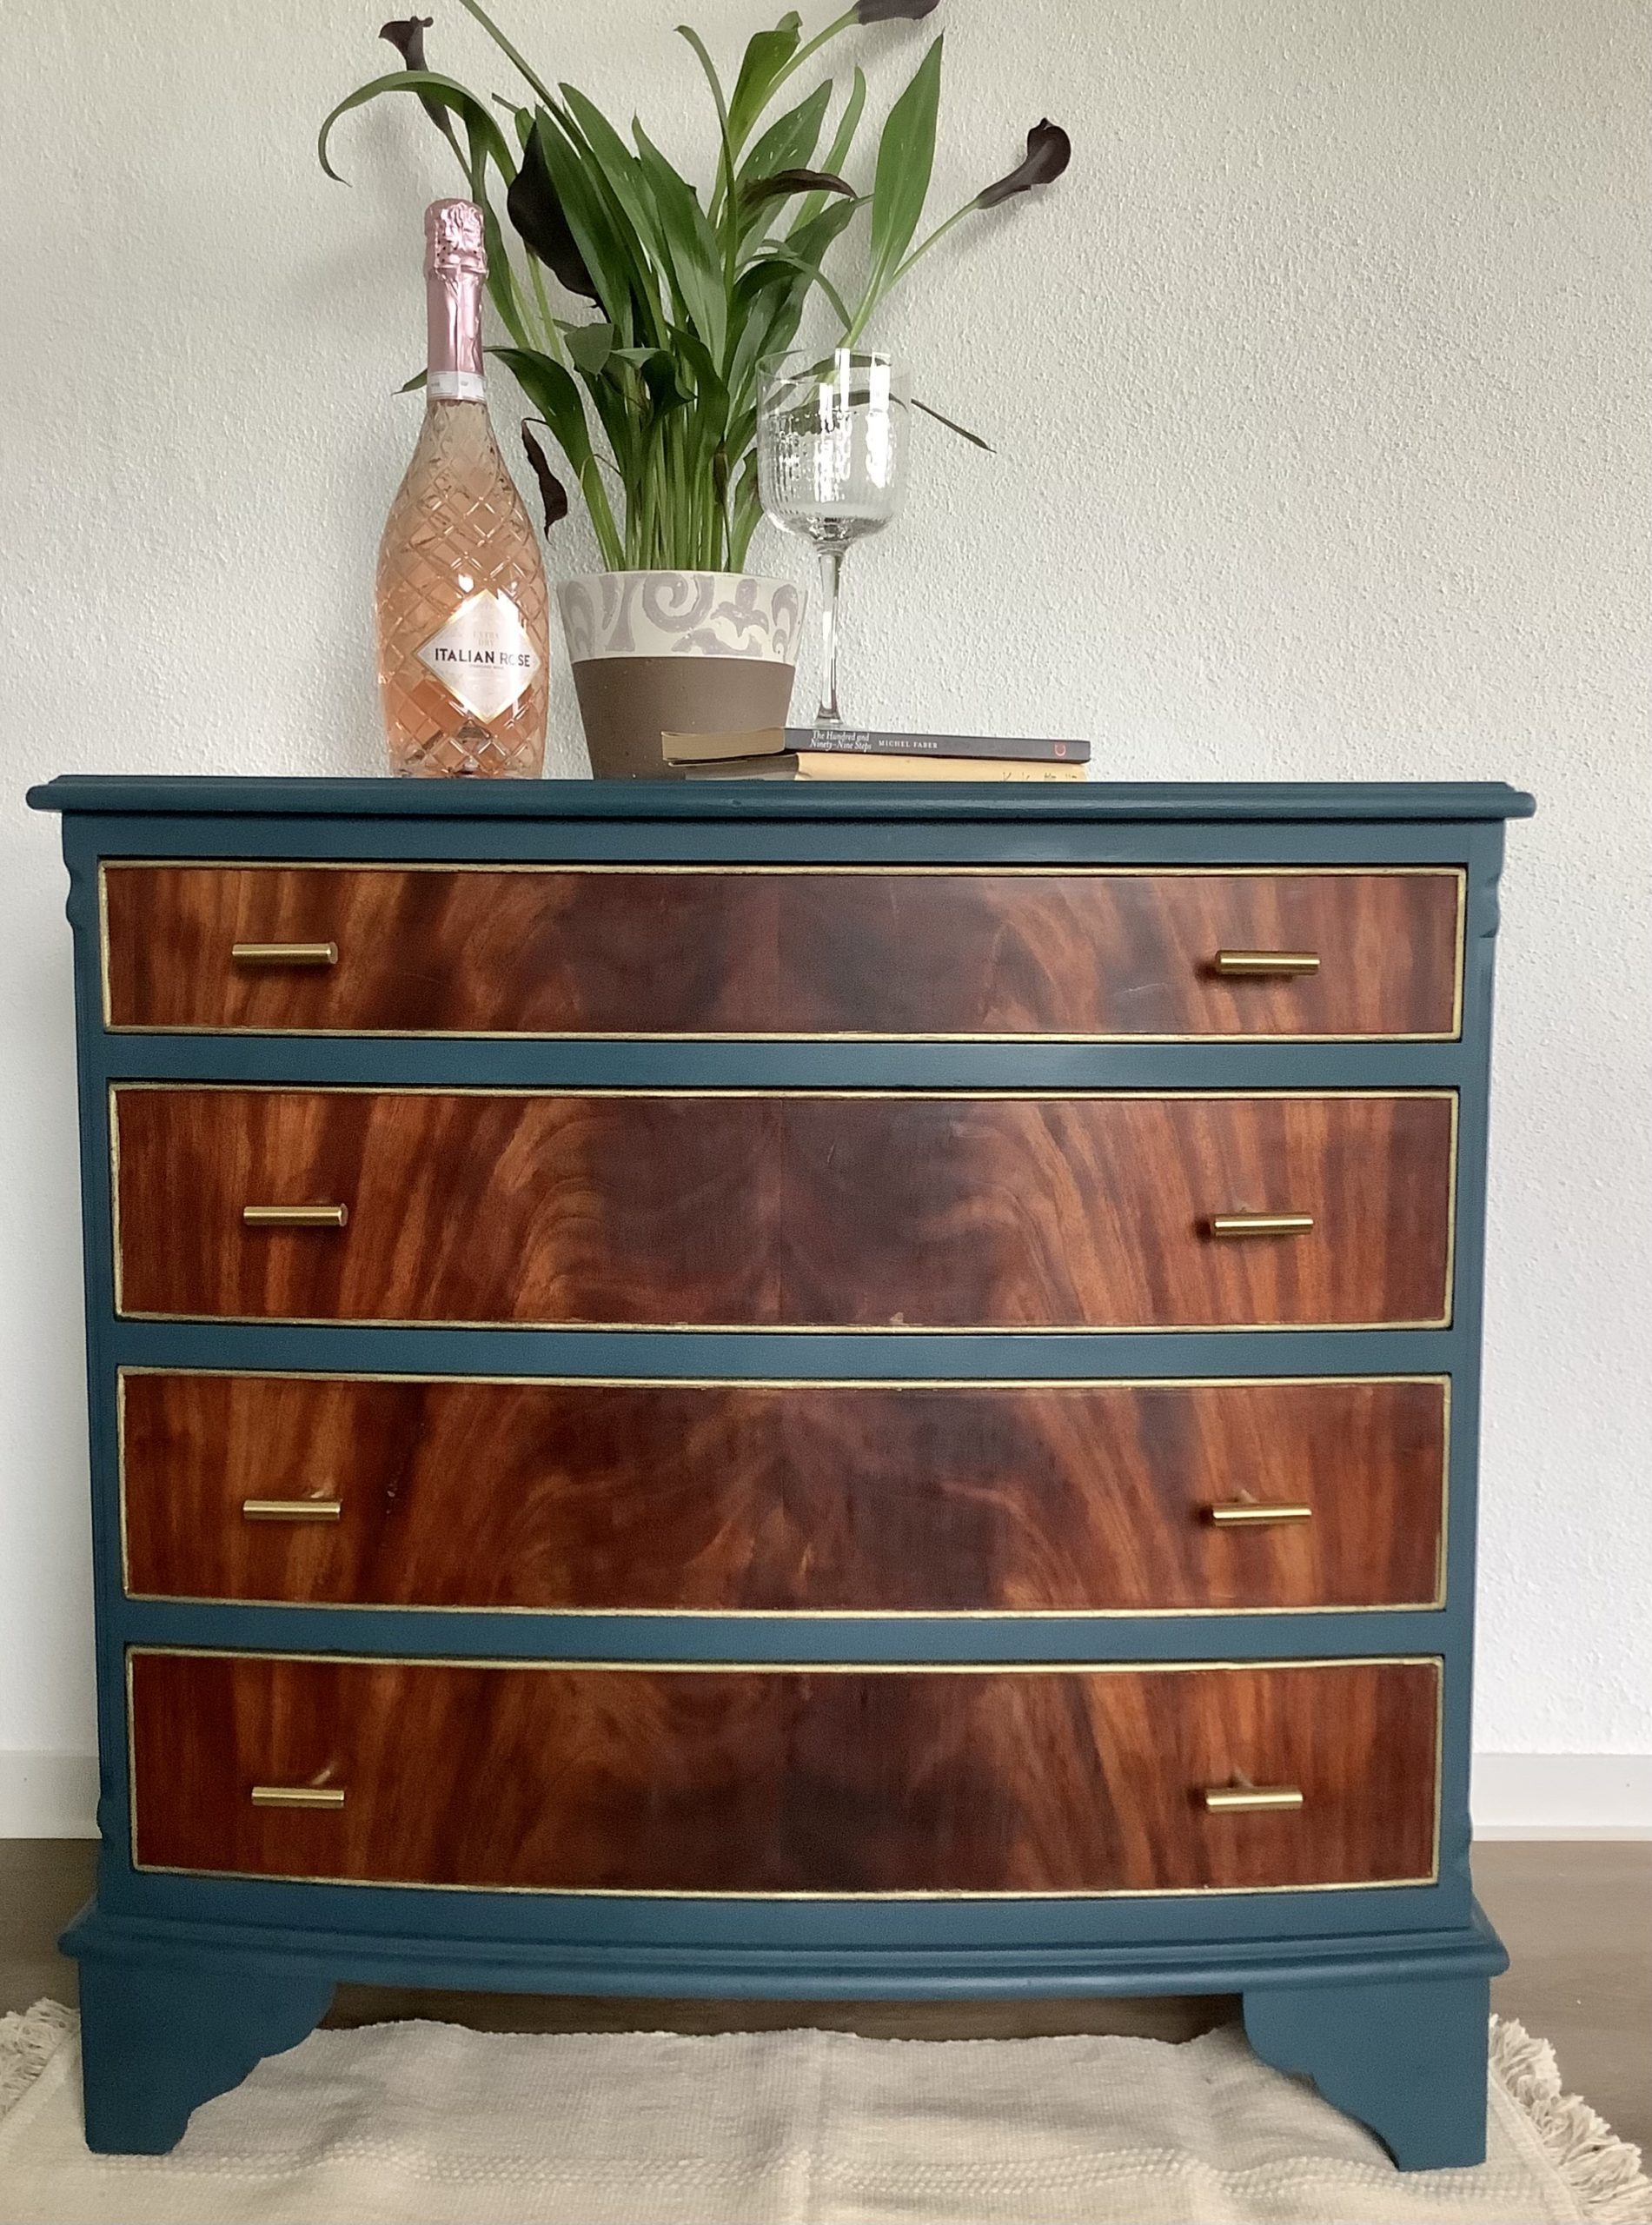 Elegant but well-used chest of drawers gets a facelift